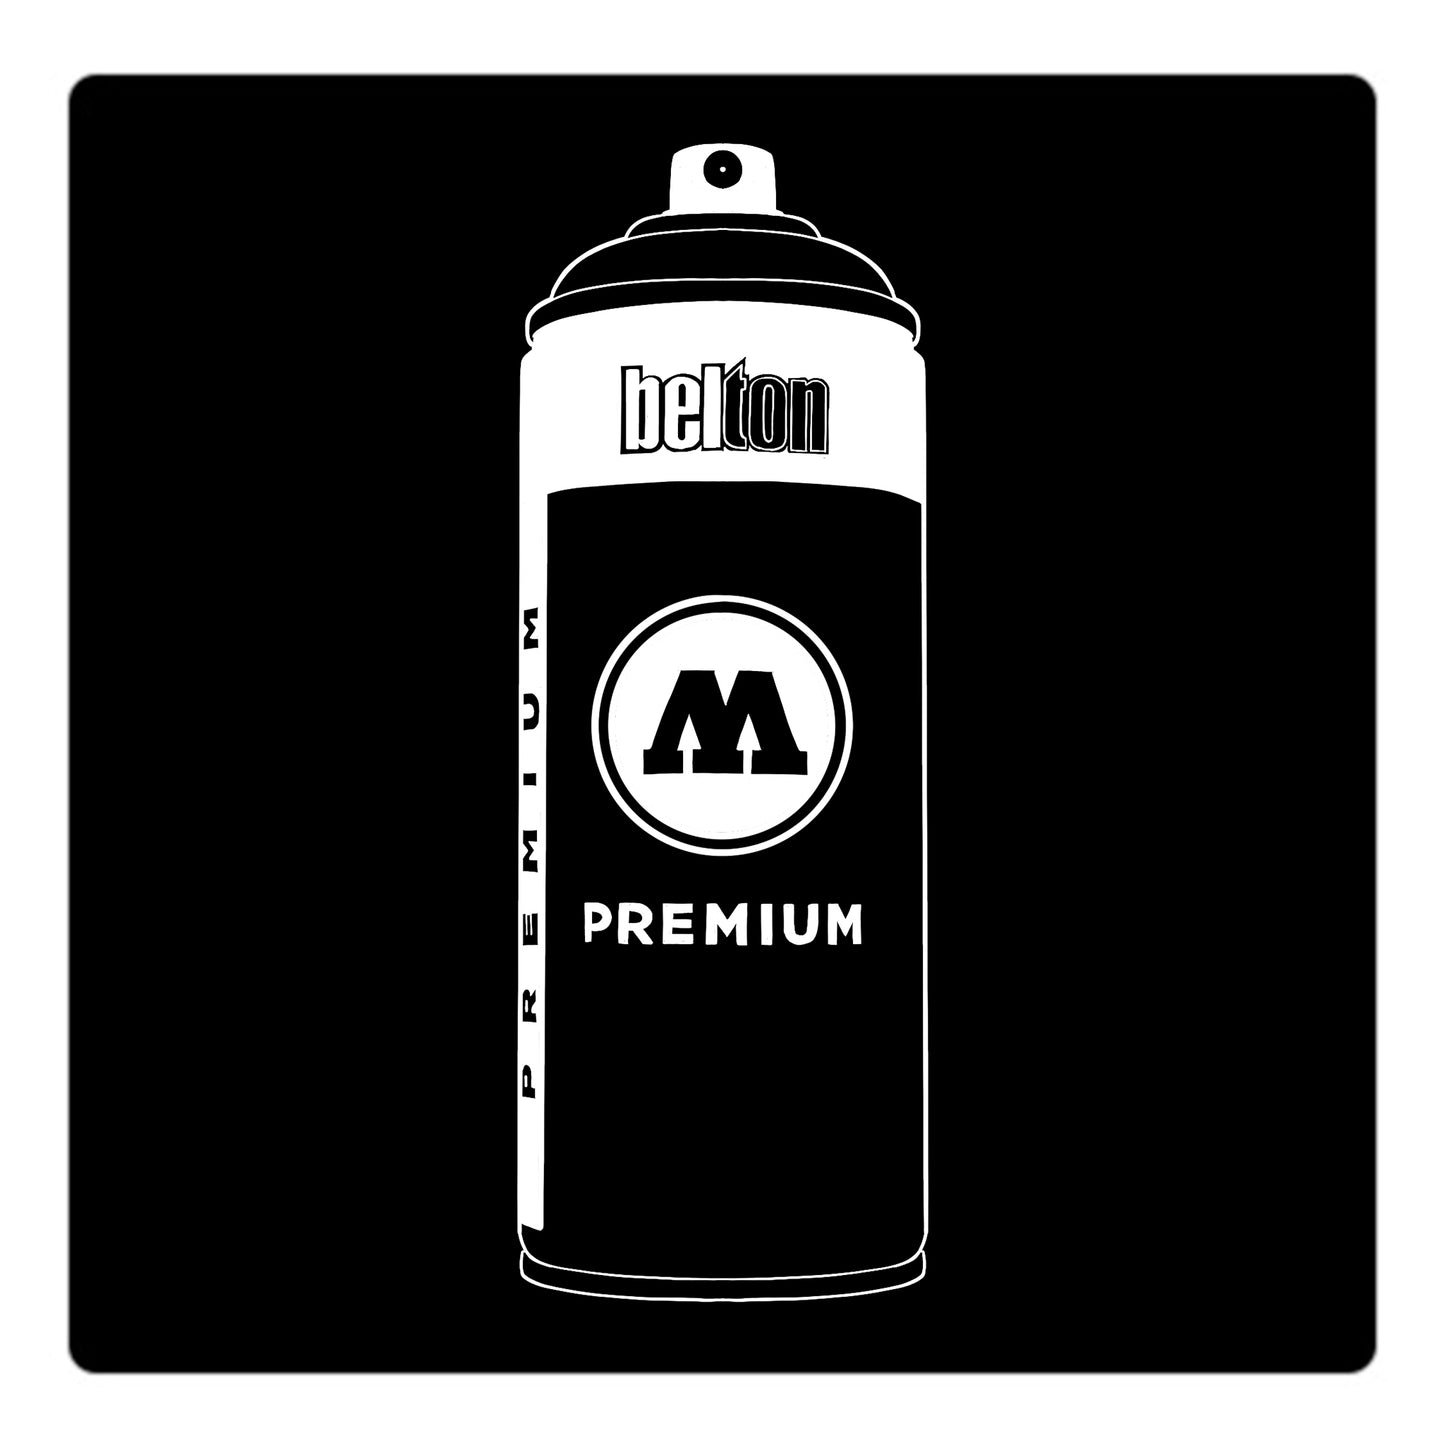 A black outline drawing of a black spray paint can with the words "belton","premium" and the letter"M" written on the face in black and white font. The background is a color swatch of the same black with a white border.